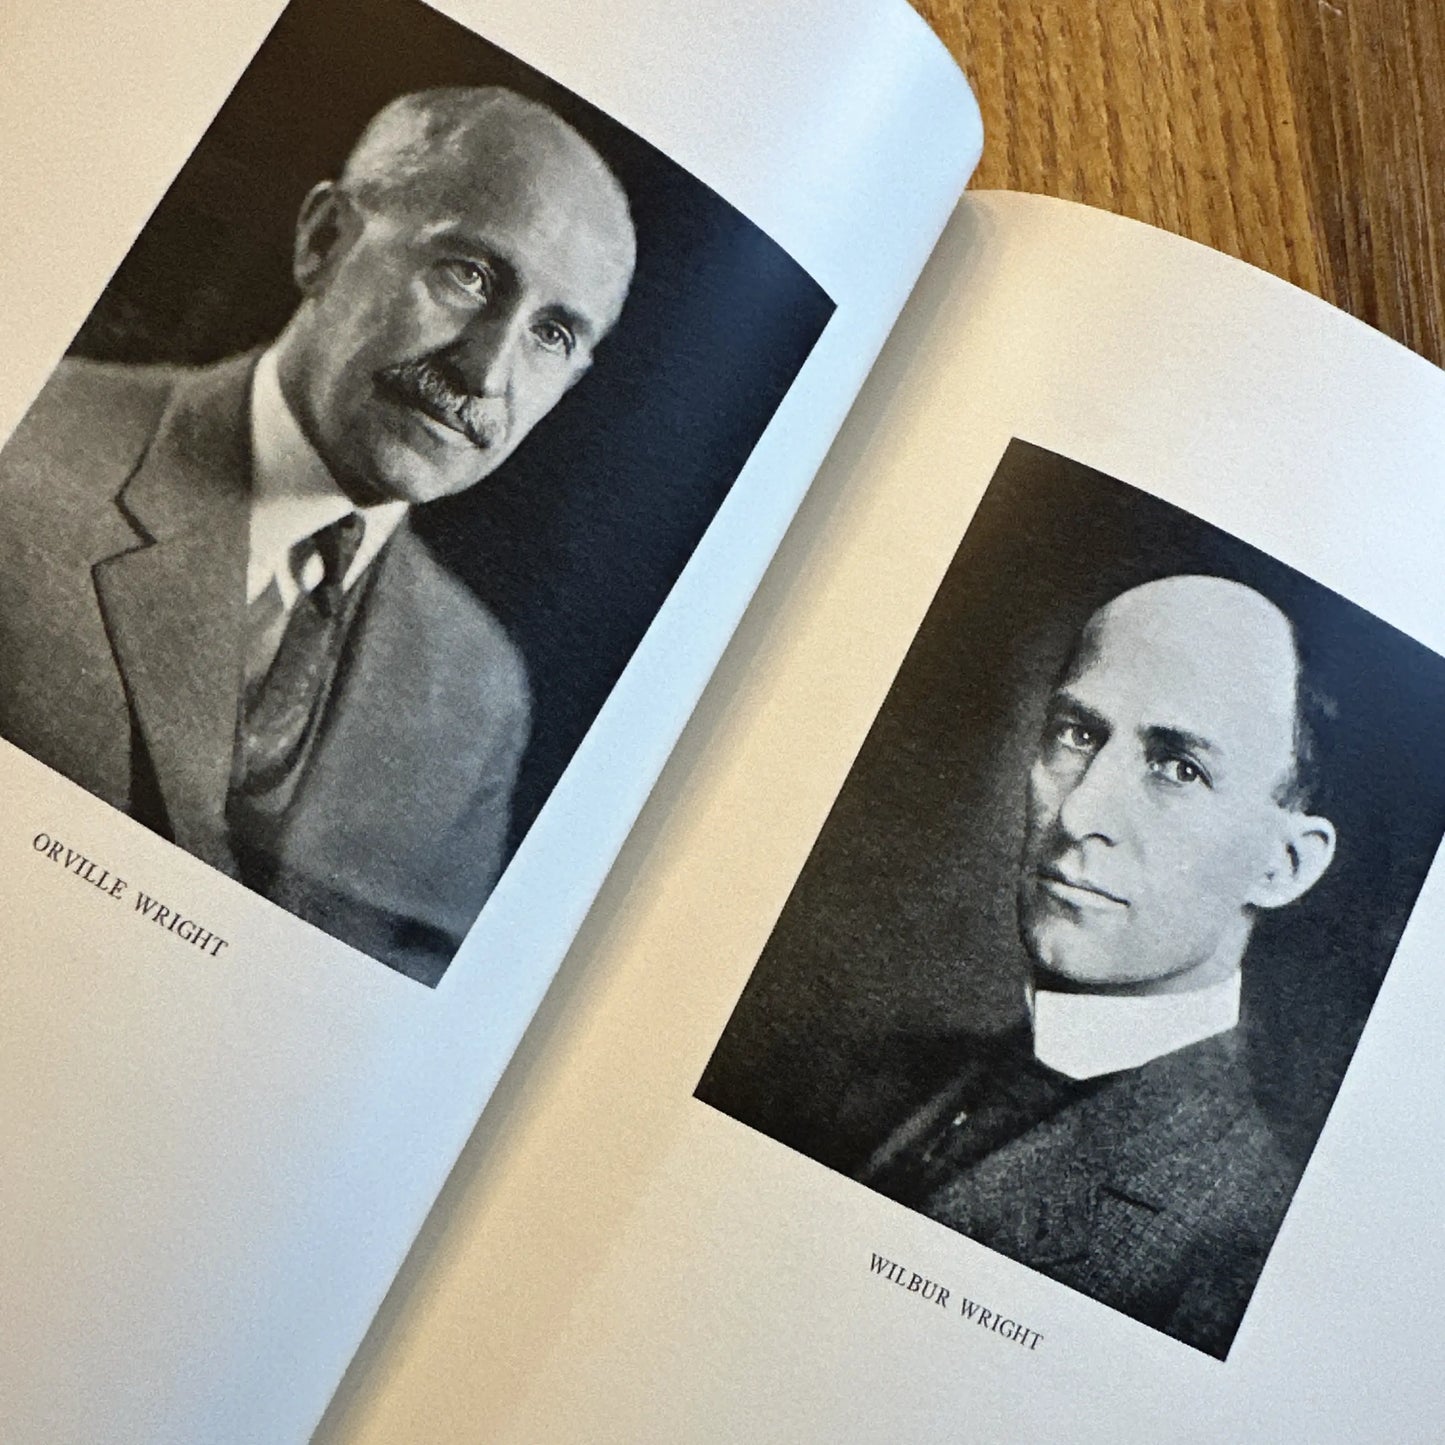 1938 book with rare print from the original negative of the only photo of the Wright Brothers’ first flight